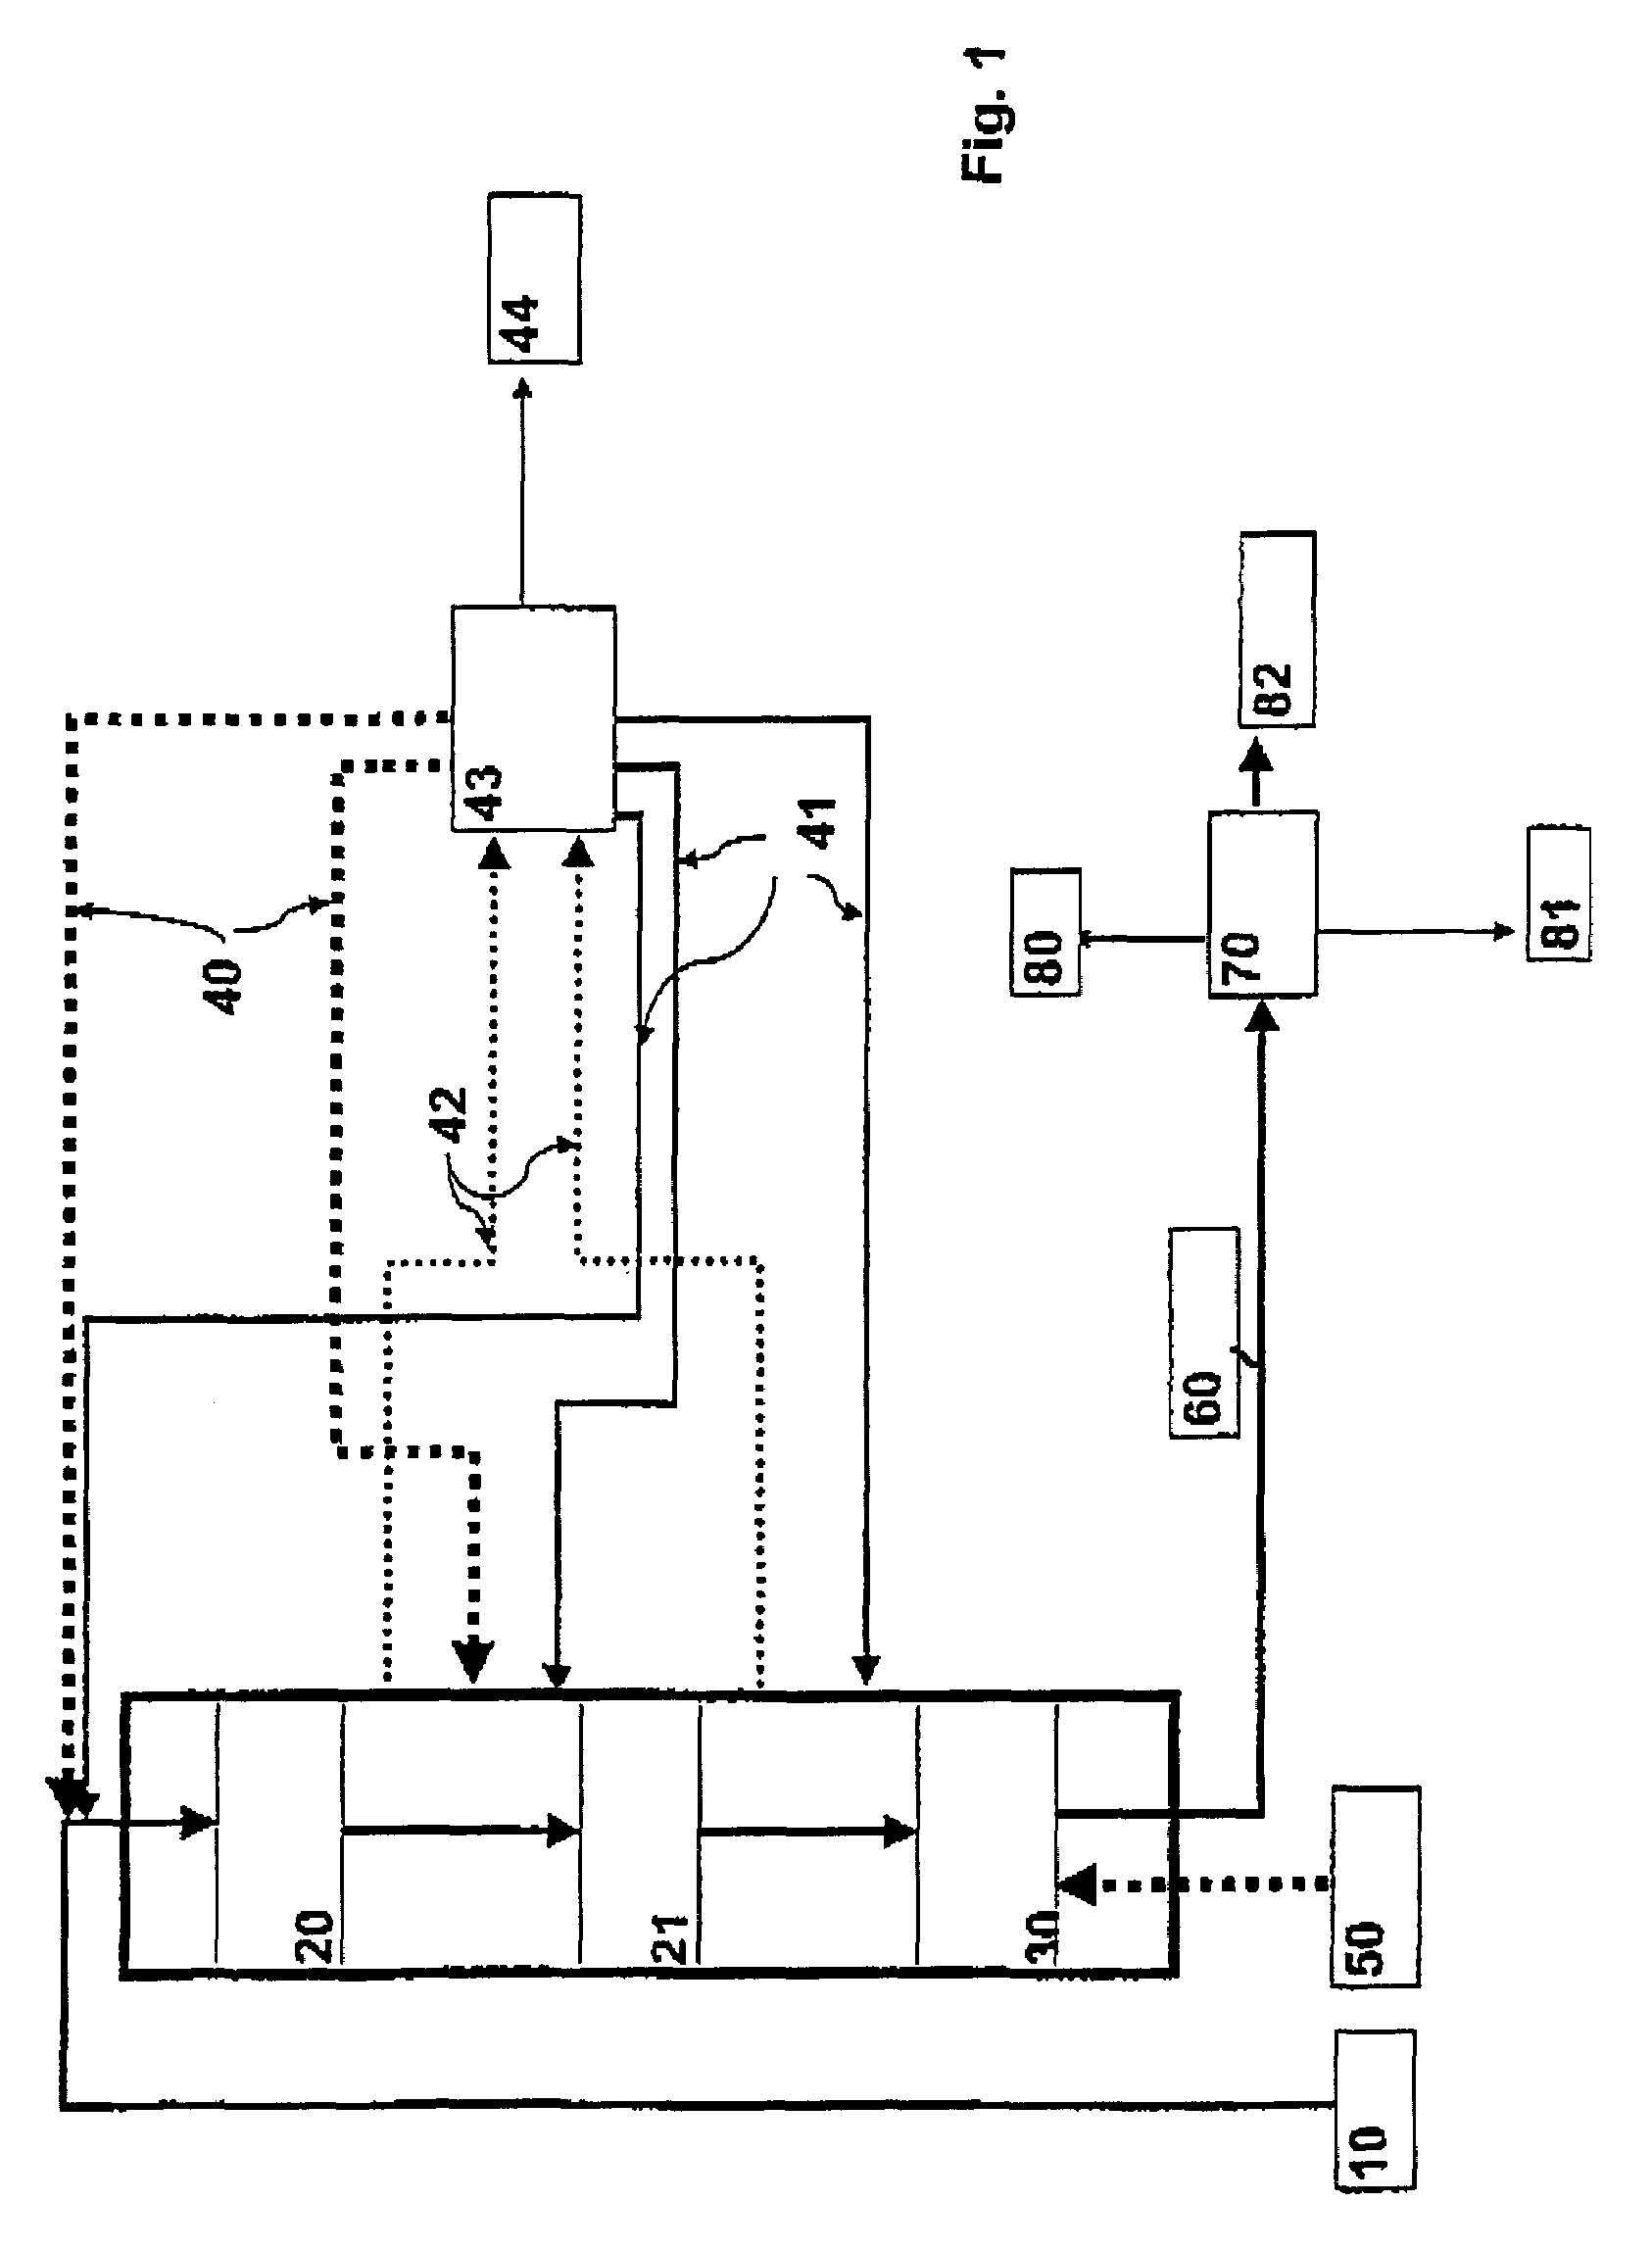 Process for producing a hydrocarbon component of biological origin